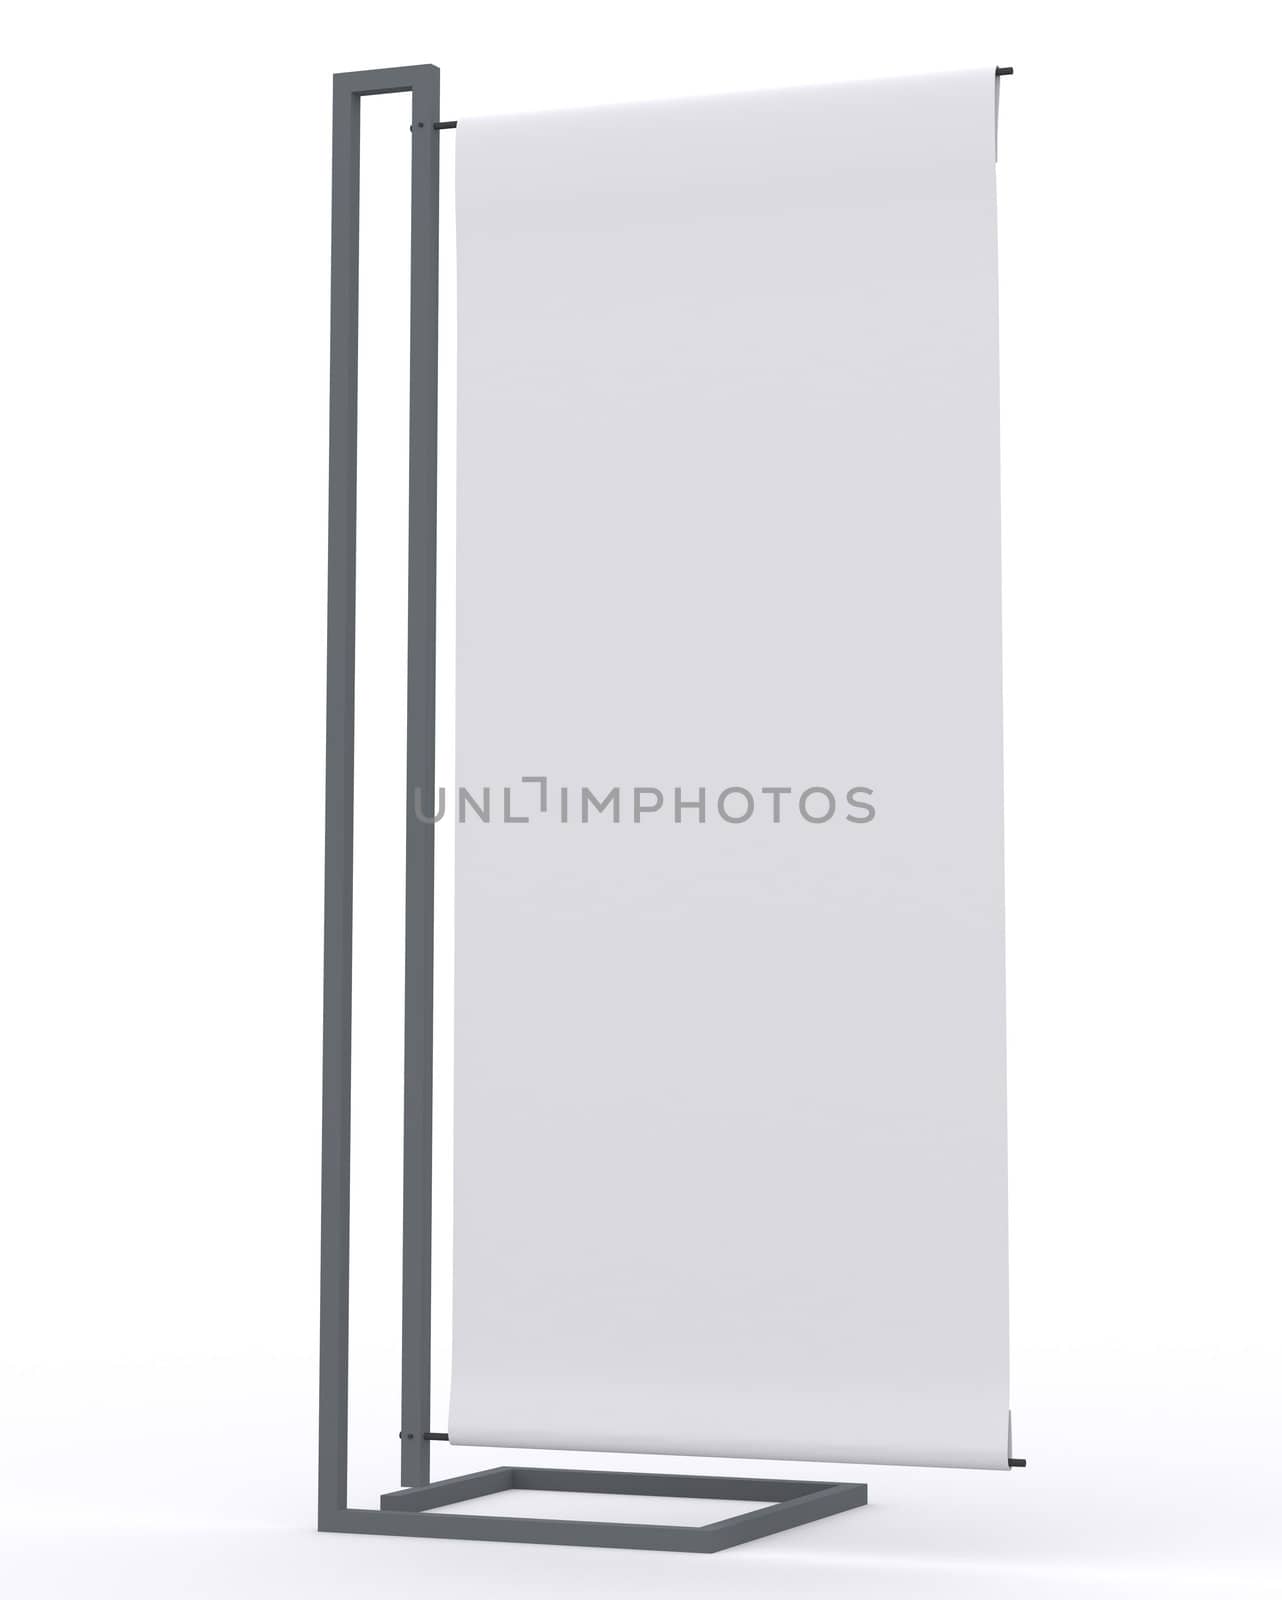 blank banner display by buchachon